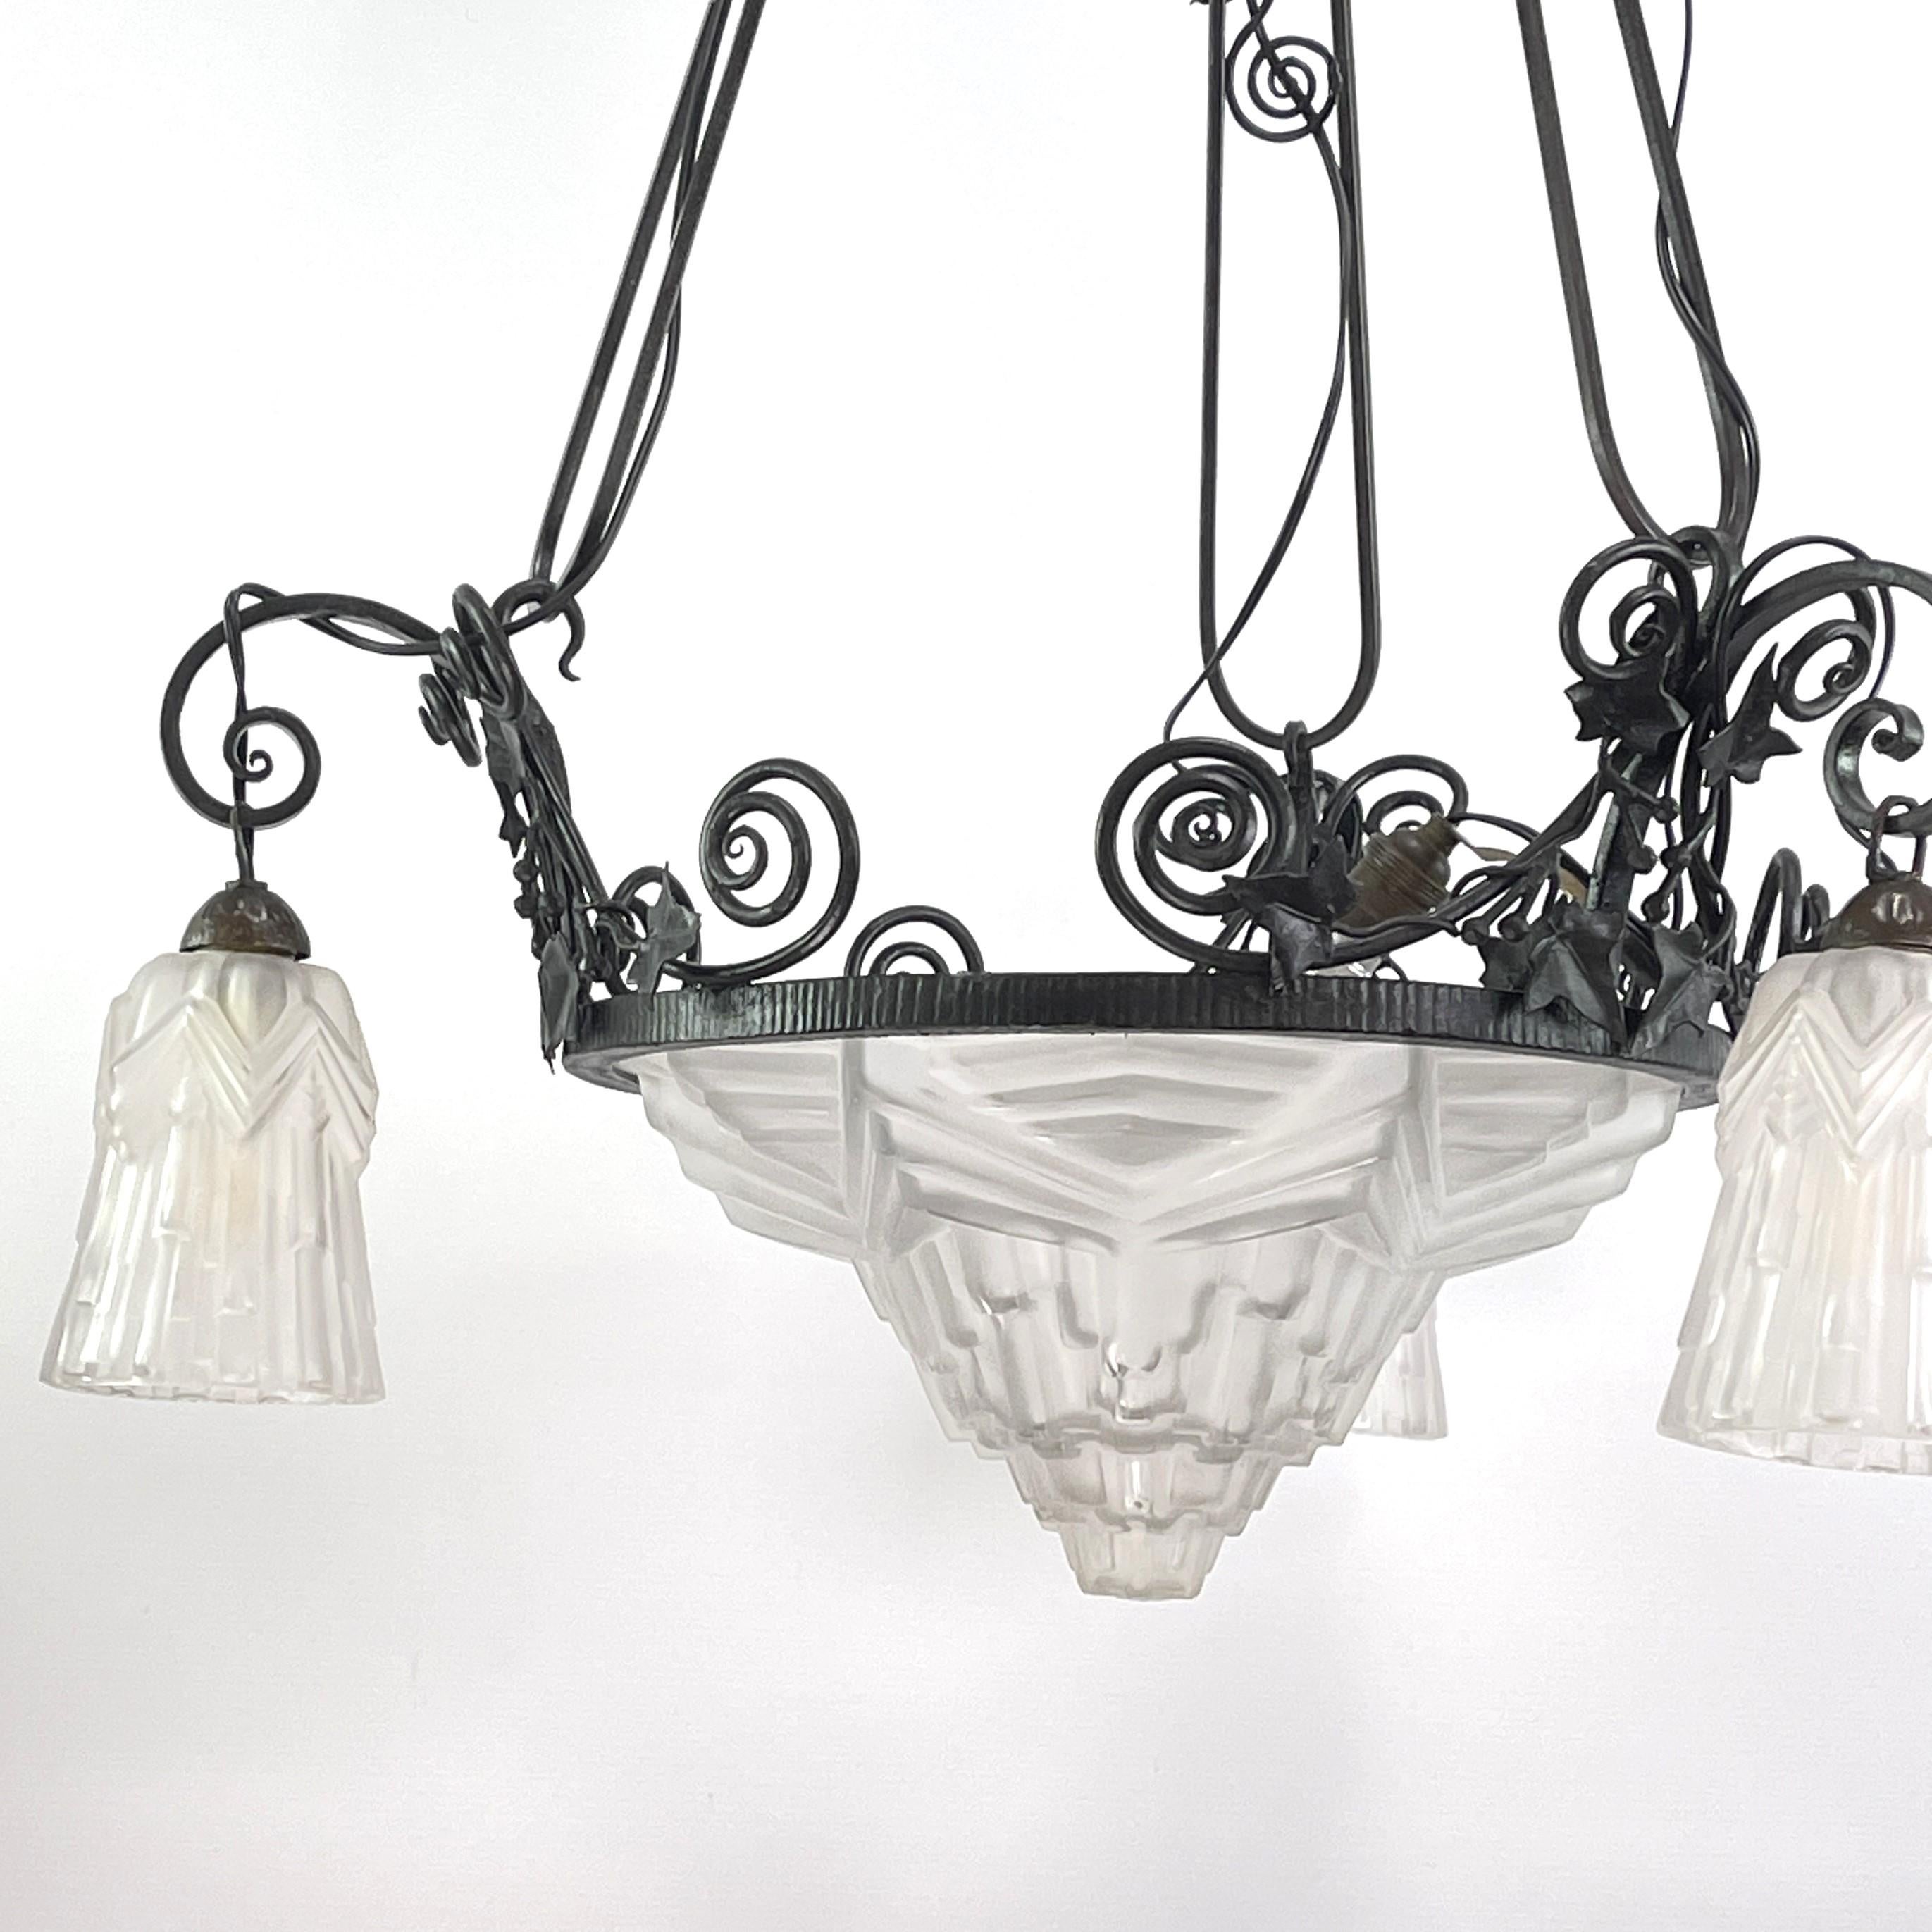 Mid-20th Century Art Deco wrought iron Ceiling Lamp, 1930s For Sale